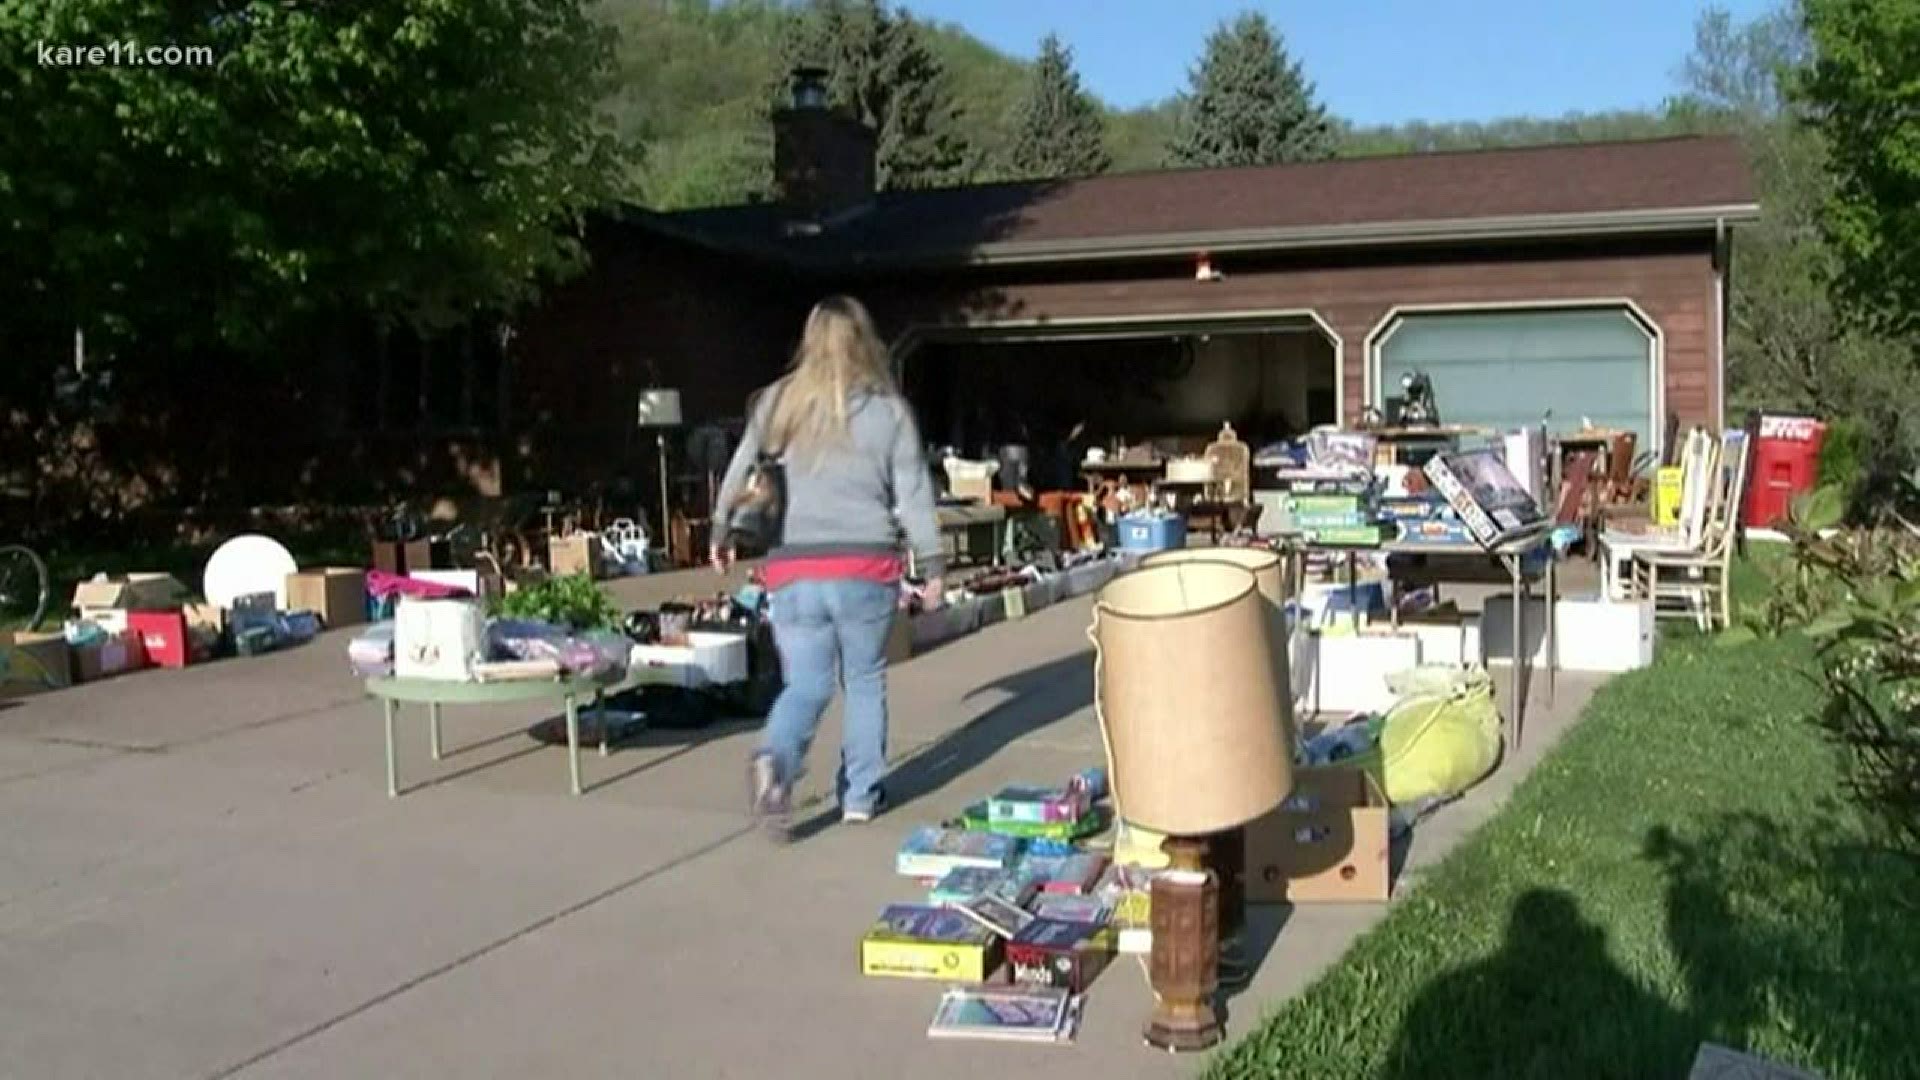 'Thrifty Minnesota' suggests some alternatives, including virtual options to clear out your extra stuff.